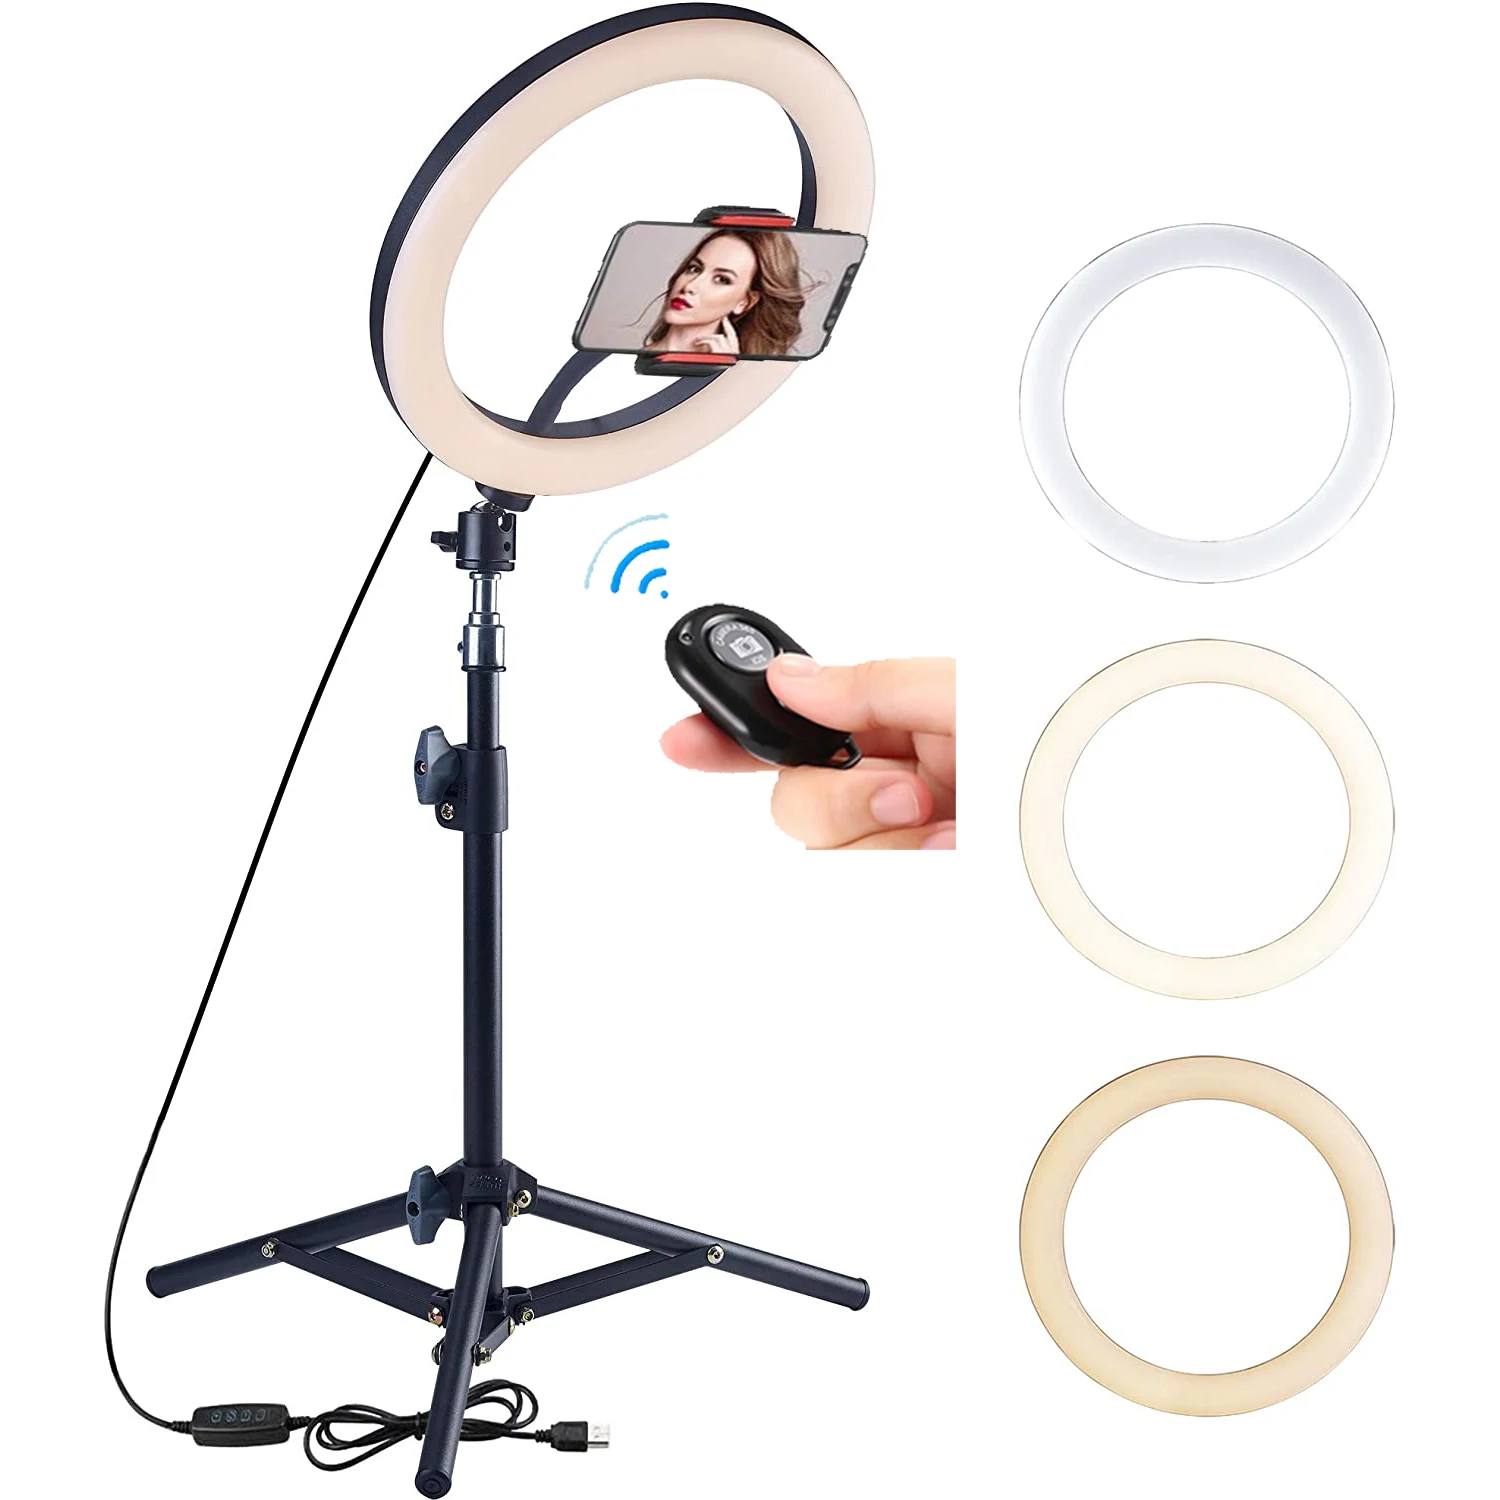 

Photo Studio Circle Selfie Ring Ligh LED Photography Fill Lighting With Tripod Stand Camera t Phone Lamp Video Youtube Ringlight